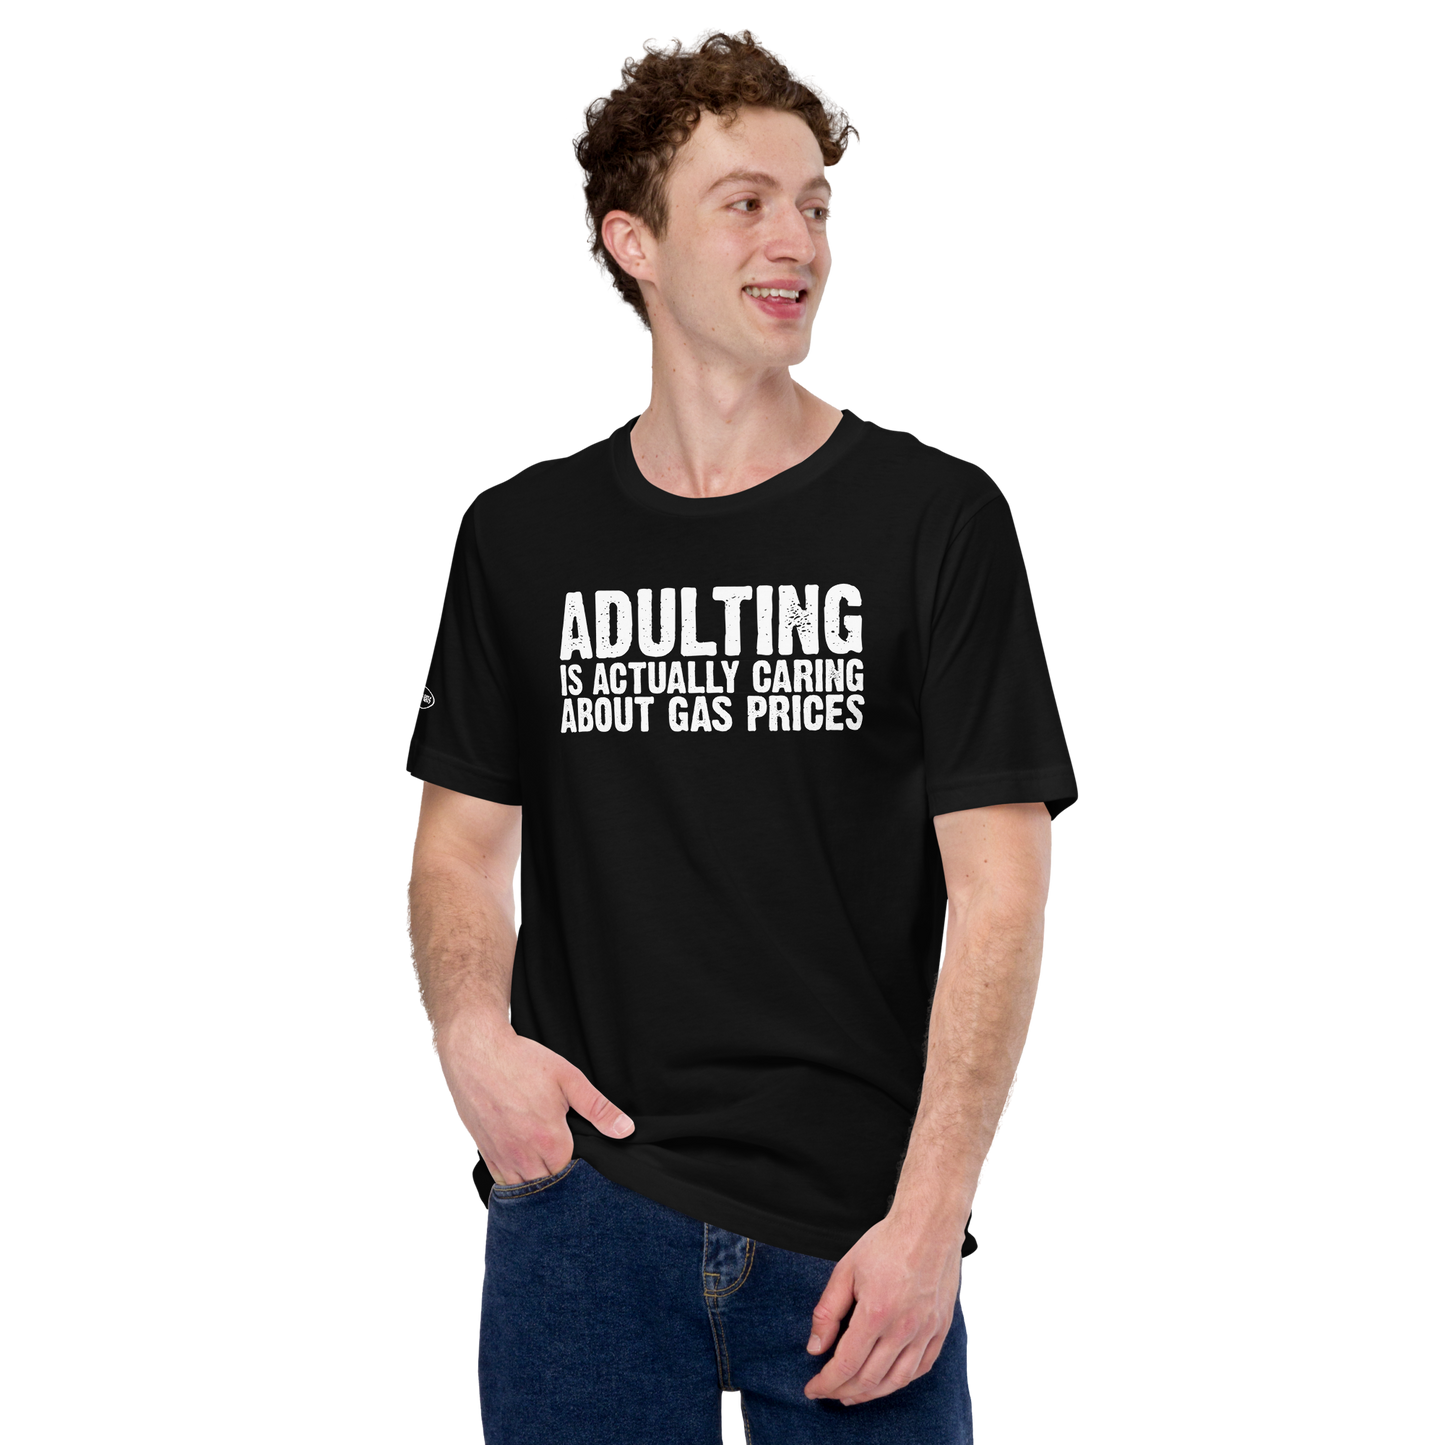 Adulting is actually caring about gas prices - Funny T-shirt